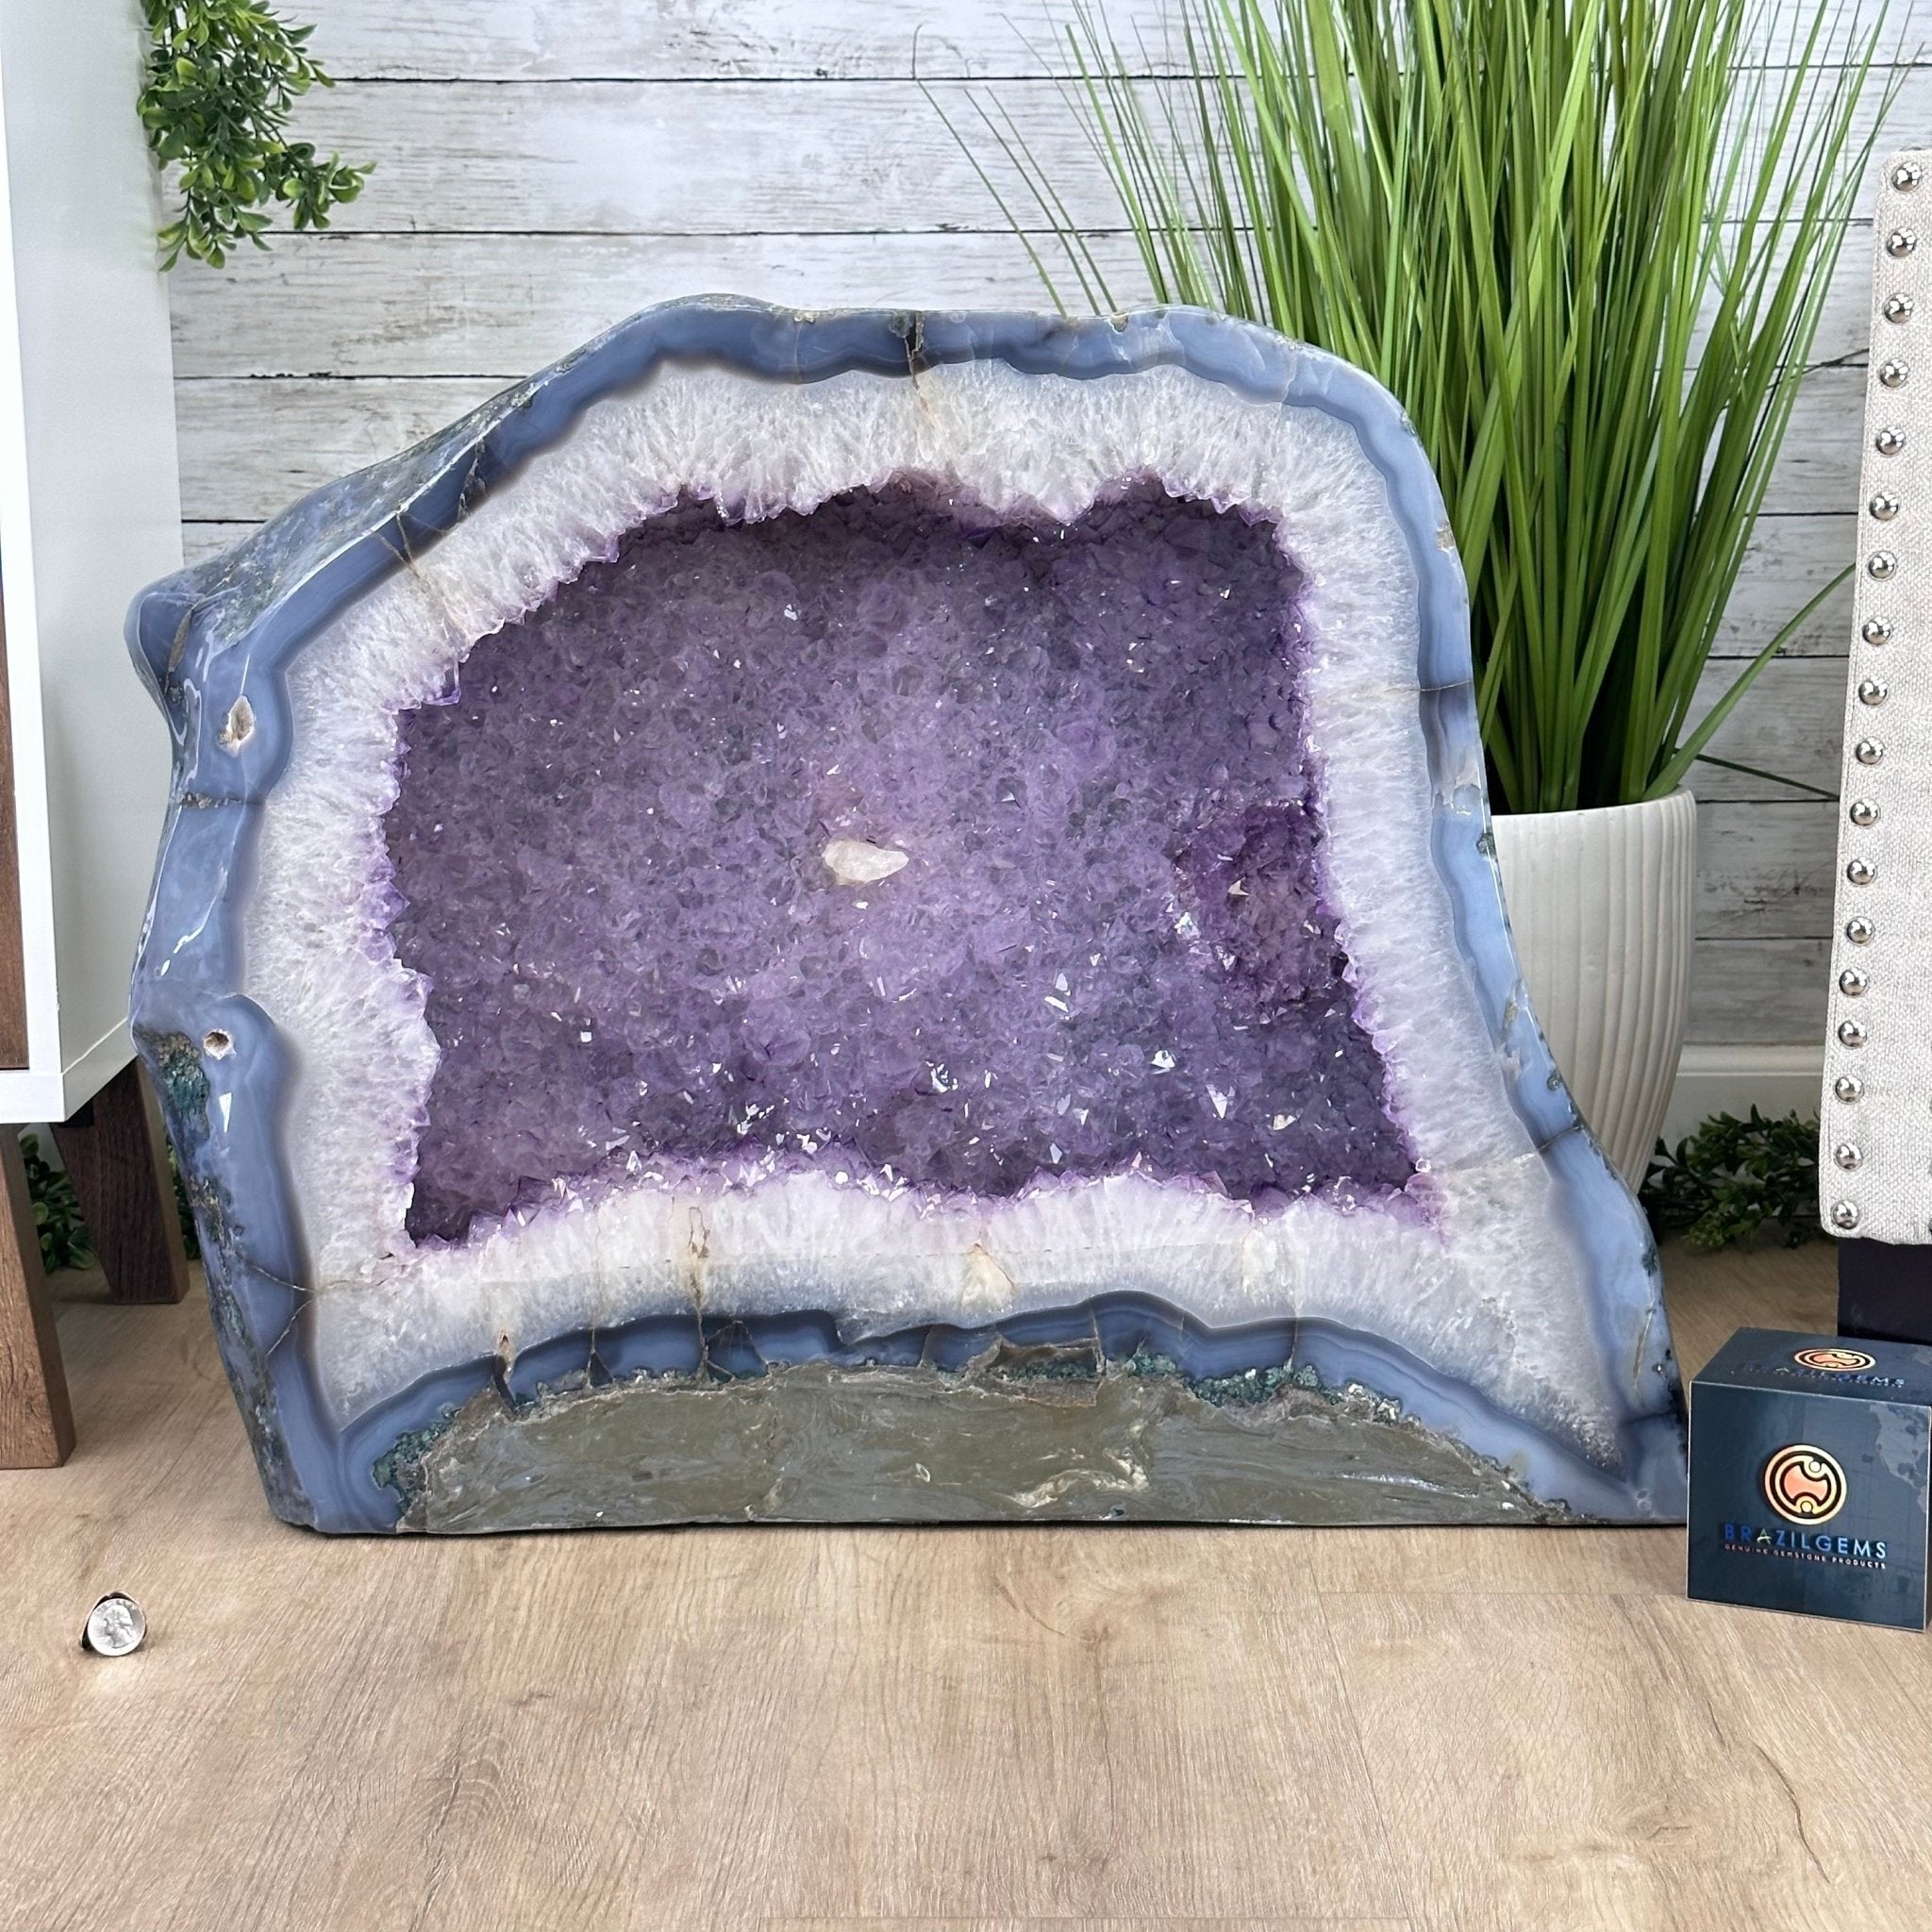 Large Extra Quality Polished Brazilian Amethyst Cathedral, 248.1 lbs & 23" tall Model #5602-0142 by Brazil Gems - Brazil GemsBrazil GemsLarge Extra Quality Polished Brazilian Amethyst Cathedral, 248.1 lbs & 23" tall Model #5602-0142 by Brazil GemsPolished Cathedrals5602-0142